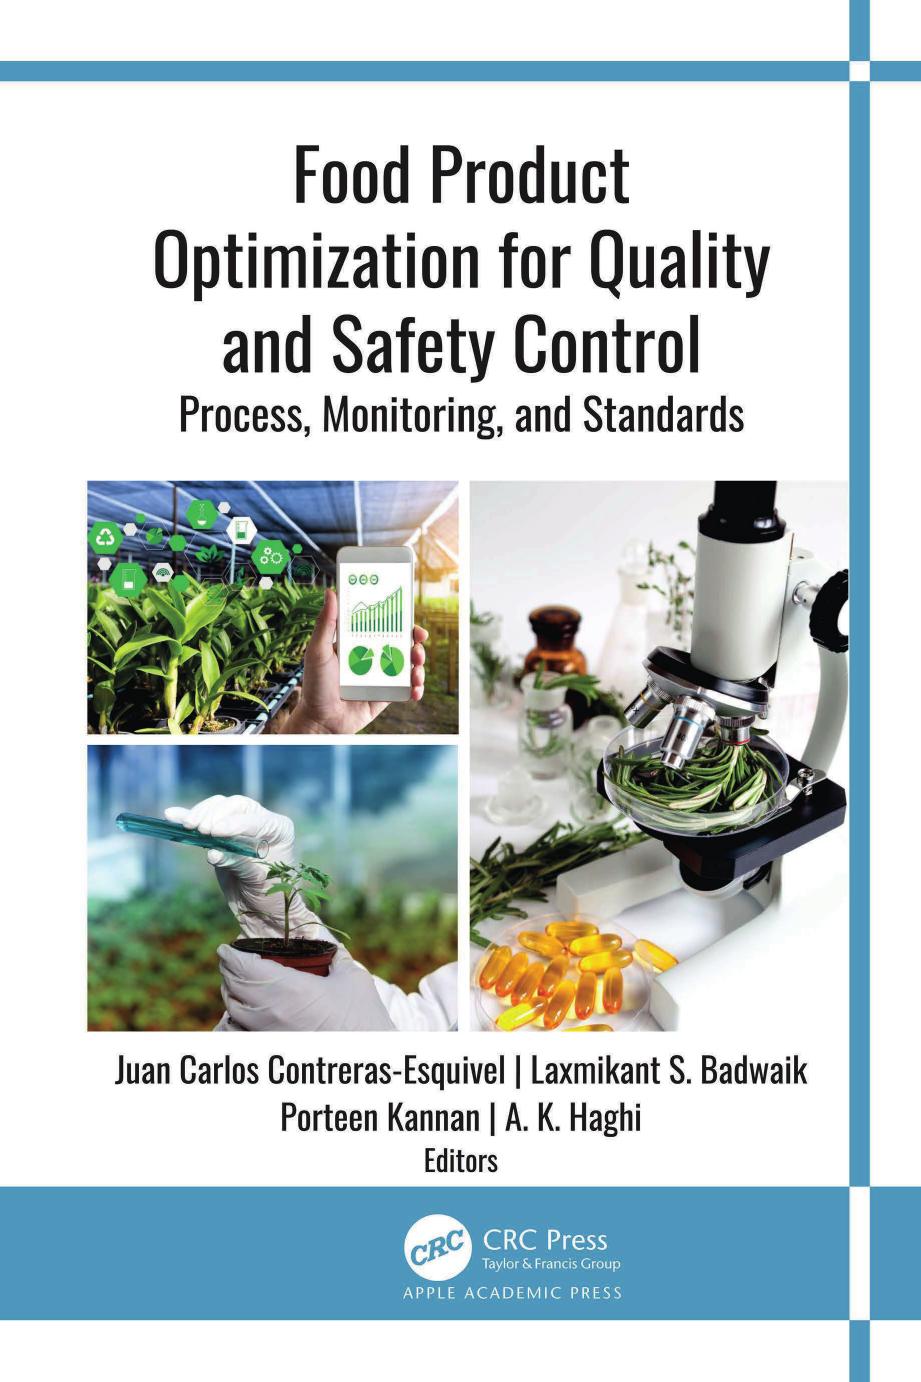 Food Product Optimization for Quality and Safety Control; Process, Monitoring, and Standards